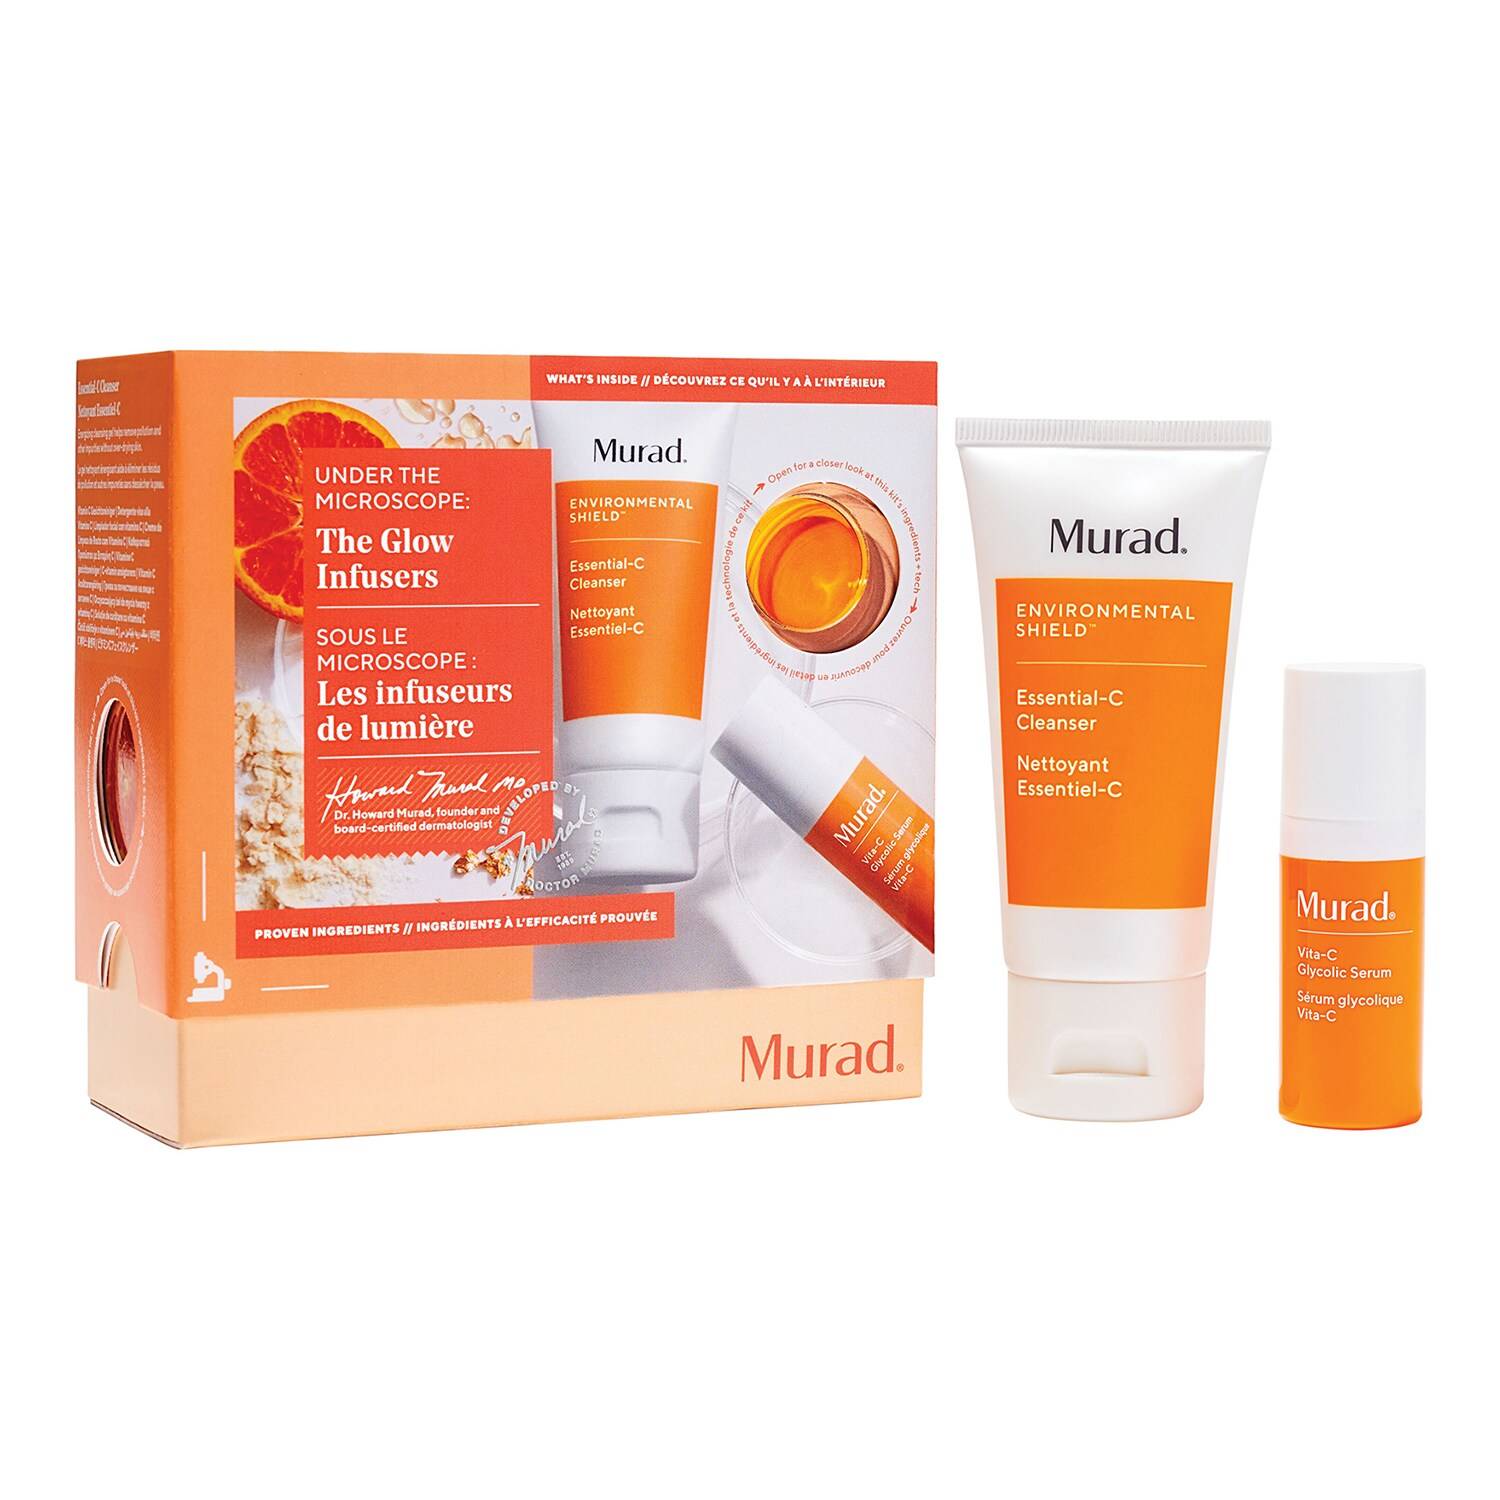 Murad Under The Microscope The Glow Infusers Kit